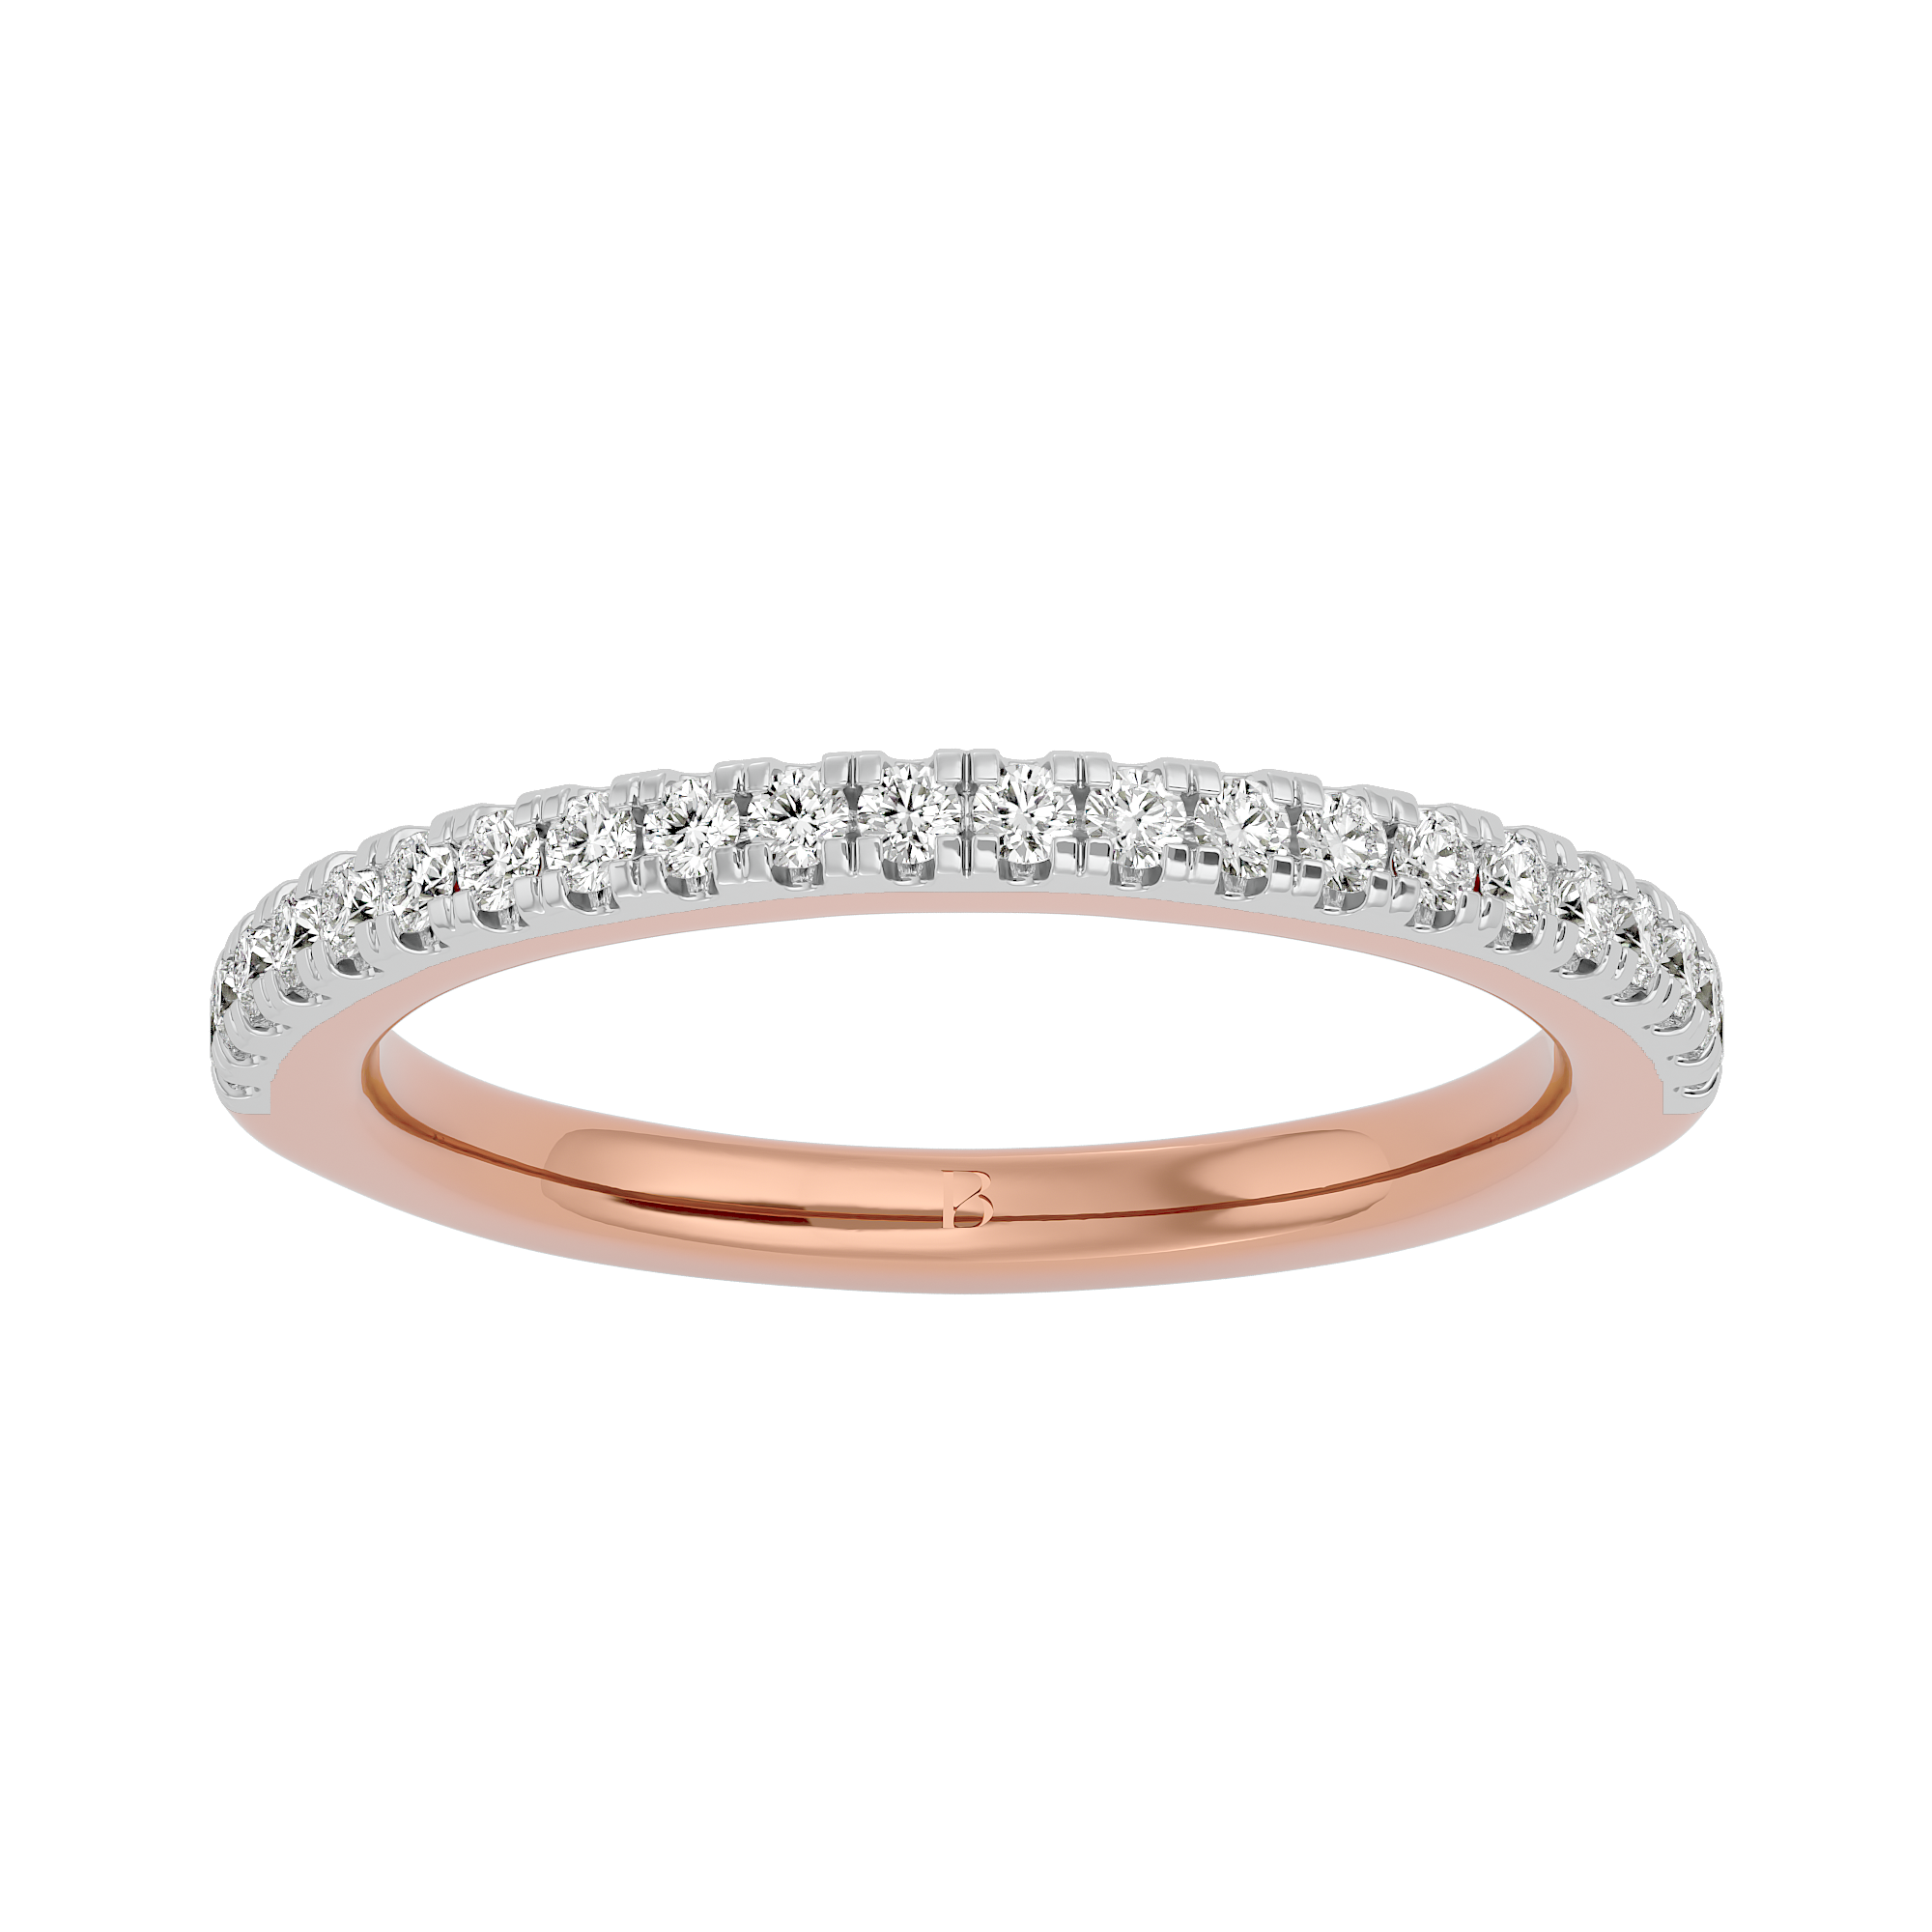 0.28 Ct Solitaire Promise Ring in 14Kt Rose Gold - Blu Diamonds